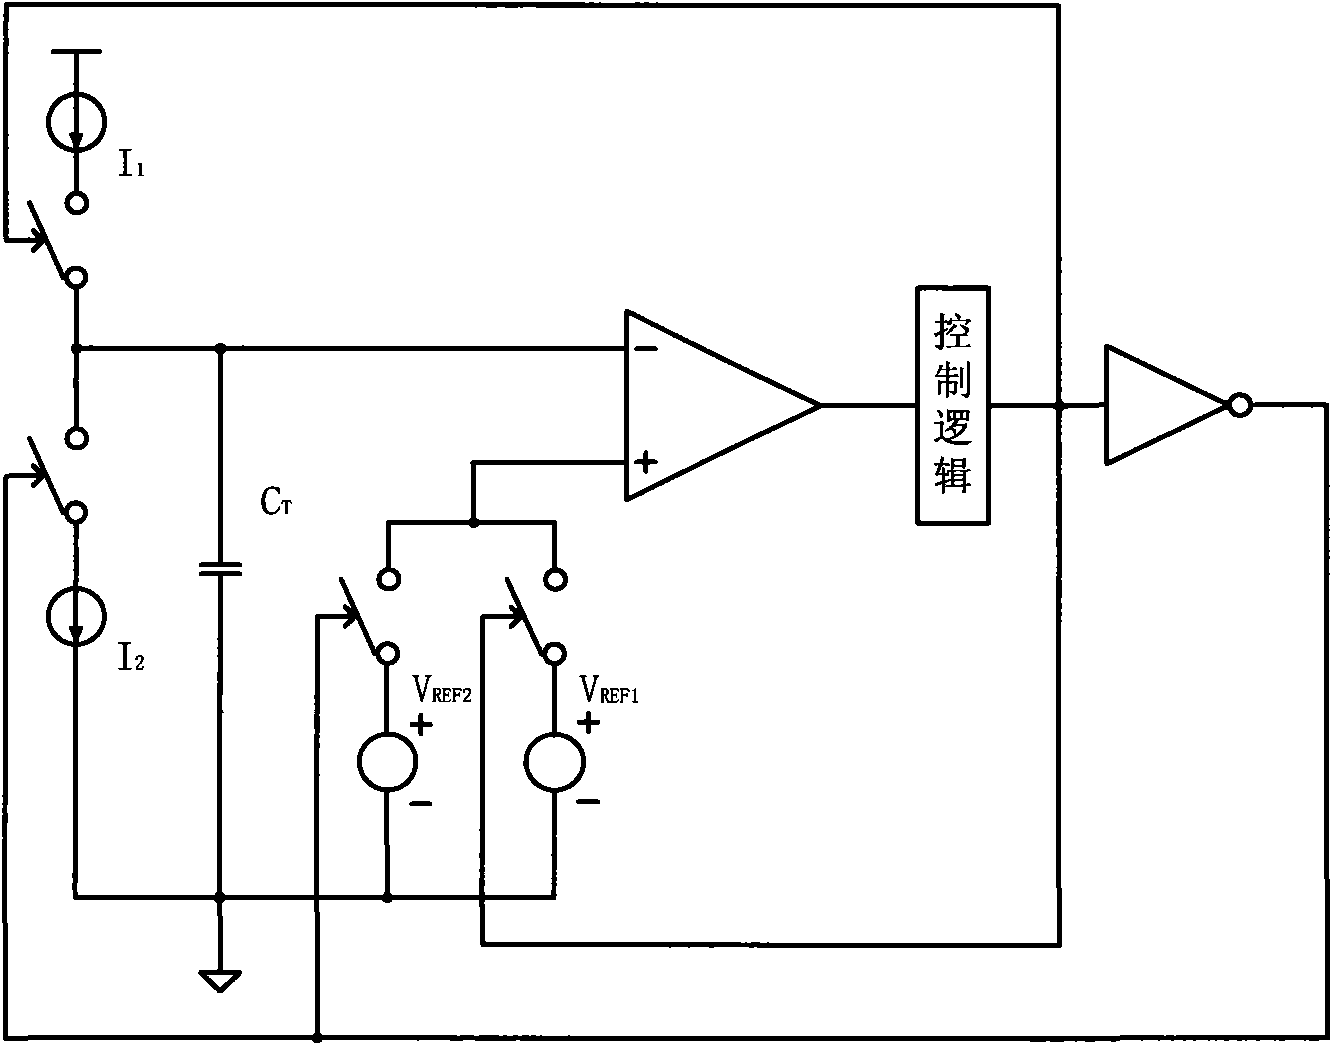 Relaxation-type voltage-controlled oscillator